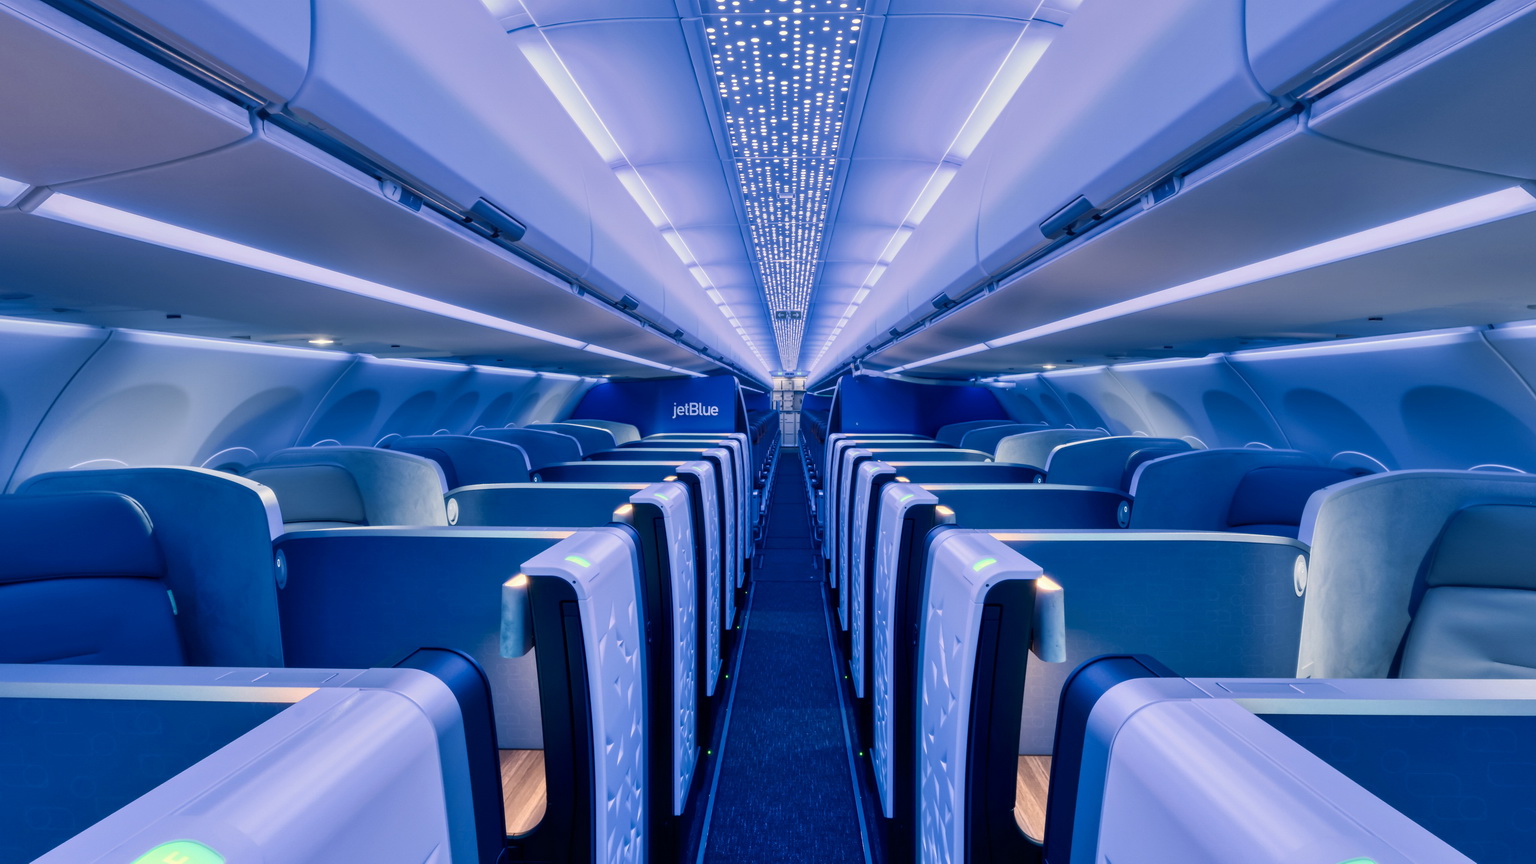 JetBlue Airways has taken delivery of the first of thirteen A321LR aircraft featuring Airbus’ new Airspace interior. The new A321LRs will support JetBlue’s plan to launch transatlantic services, starting with direct flights to London later this year. Click to enlarge.